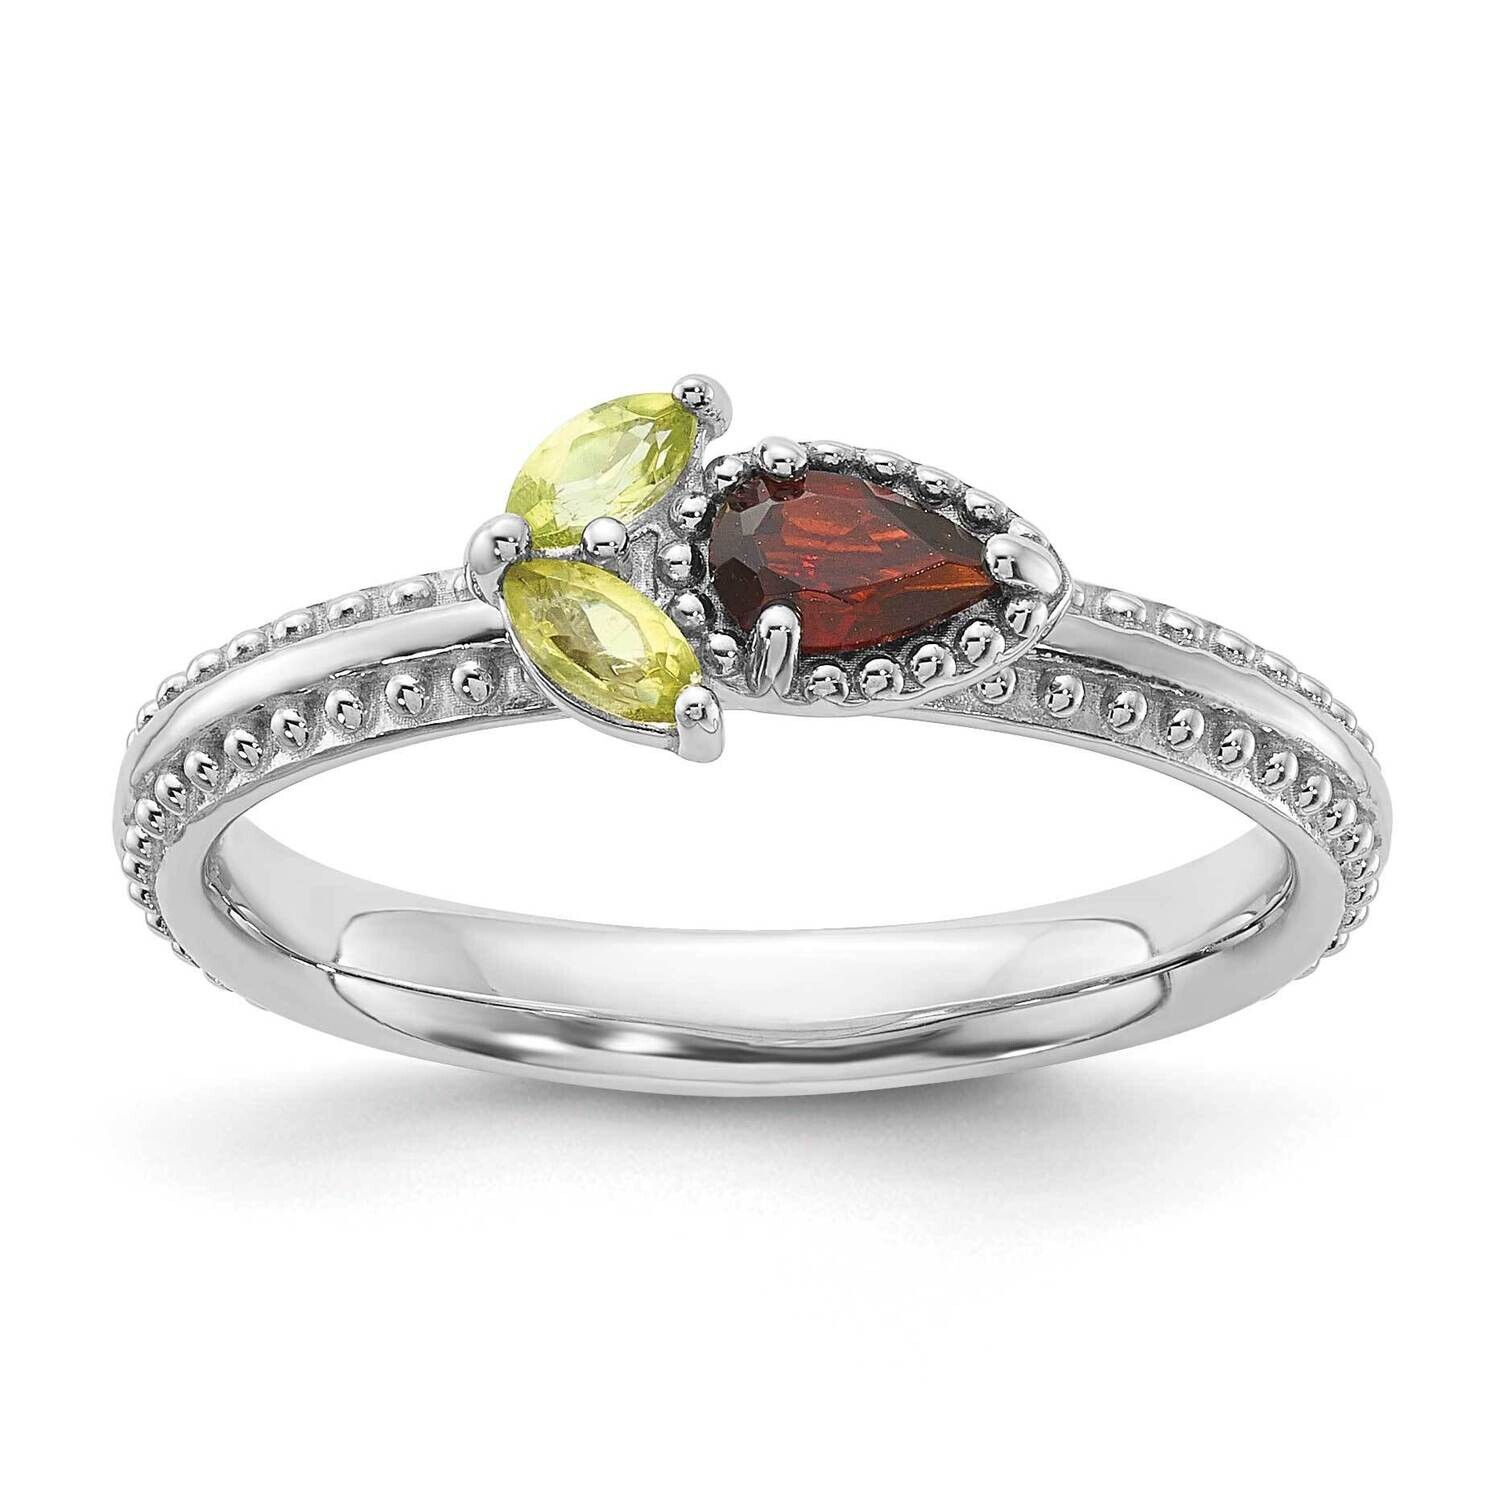 Stackable Expressions Rhodium-Plated Textured Garnet Peridot Flower Ring Sterling Silver QSK2240